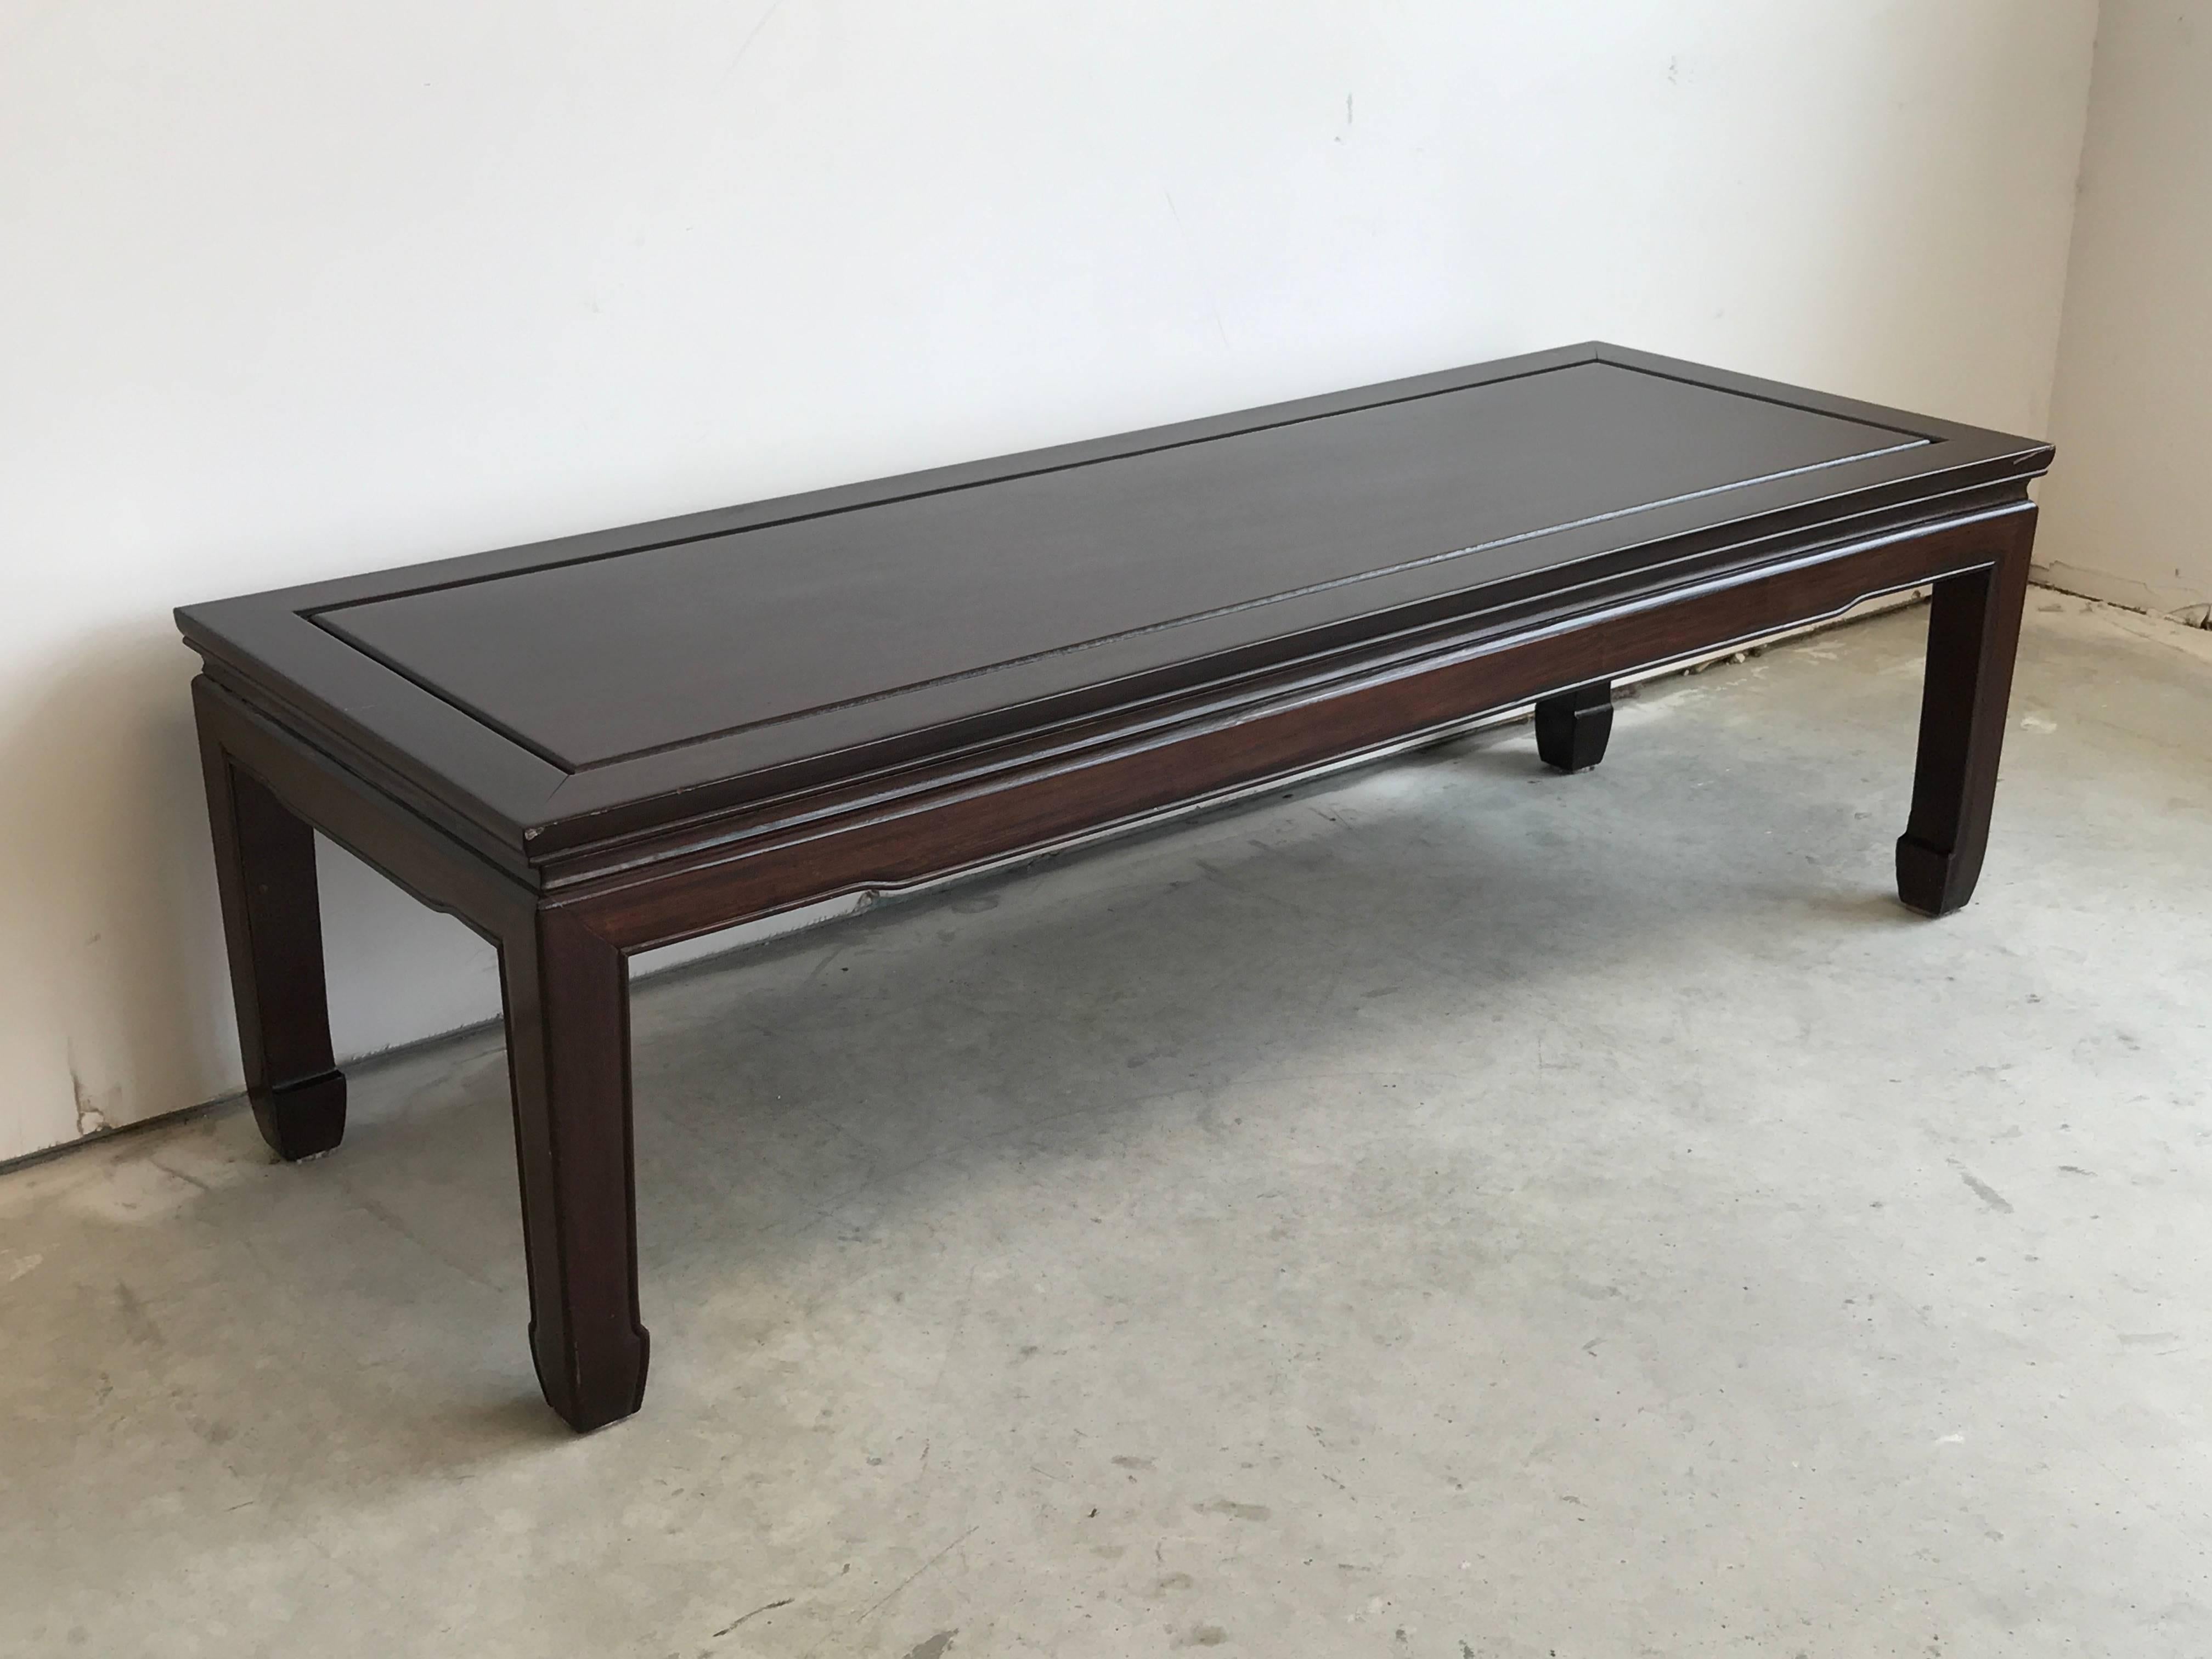 Offered is a beautiful, 1960s Ming style coffee table.